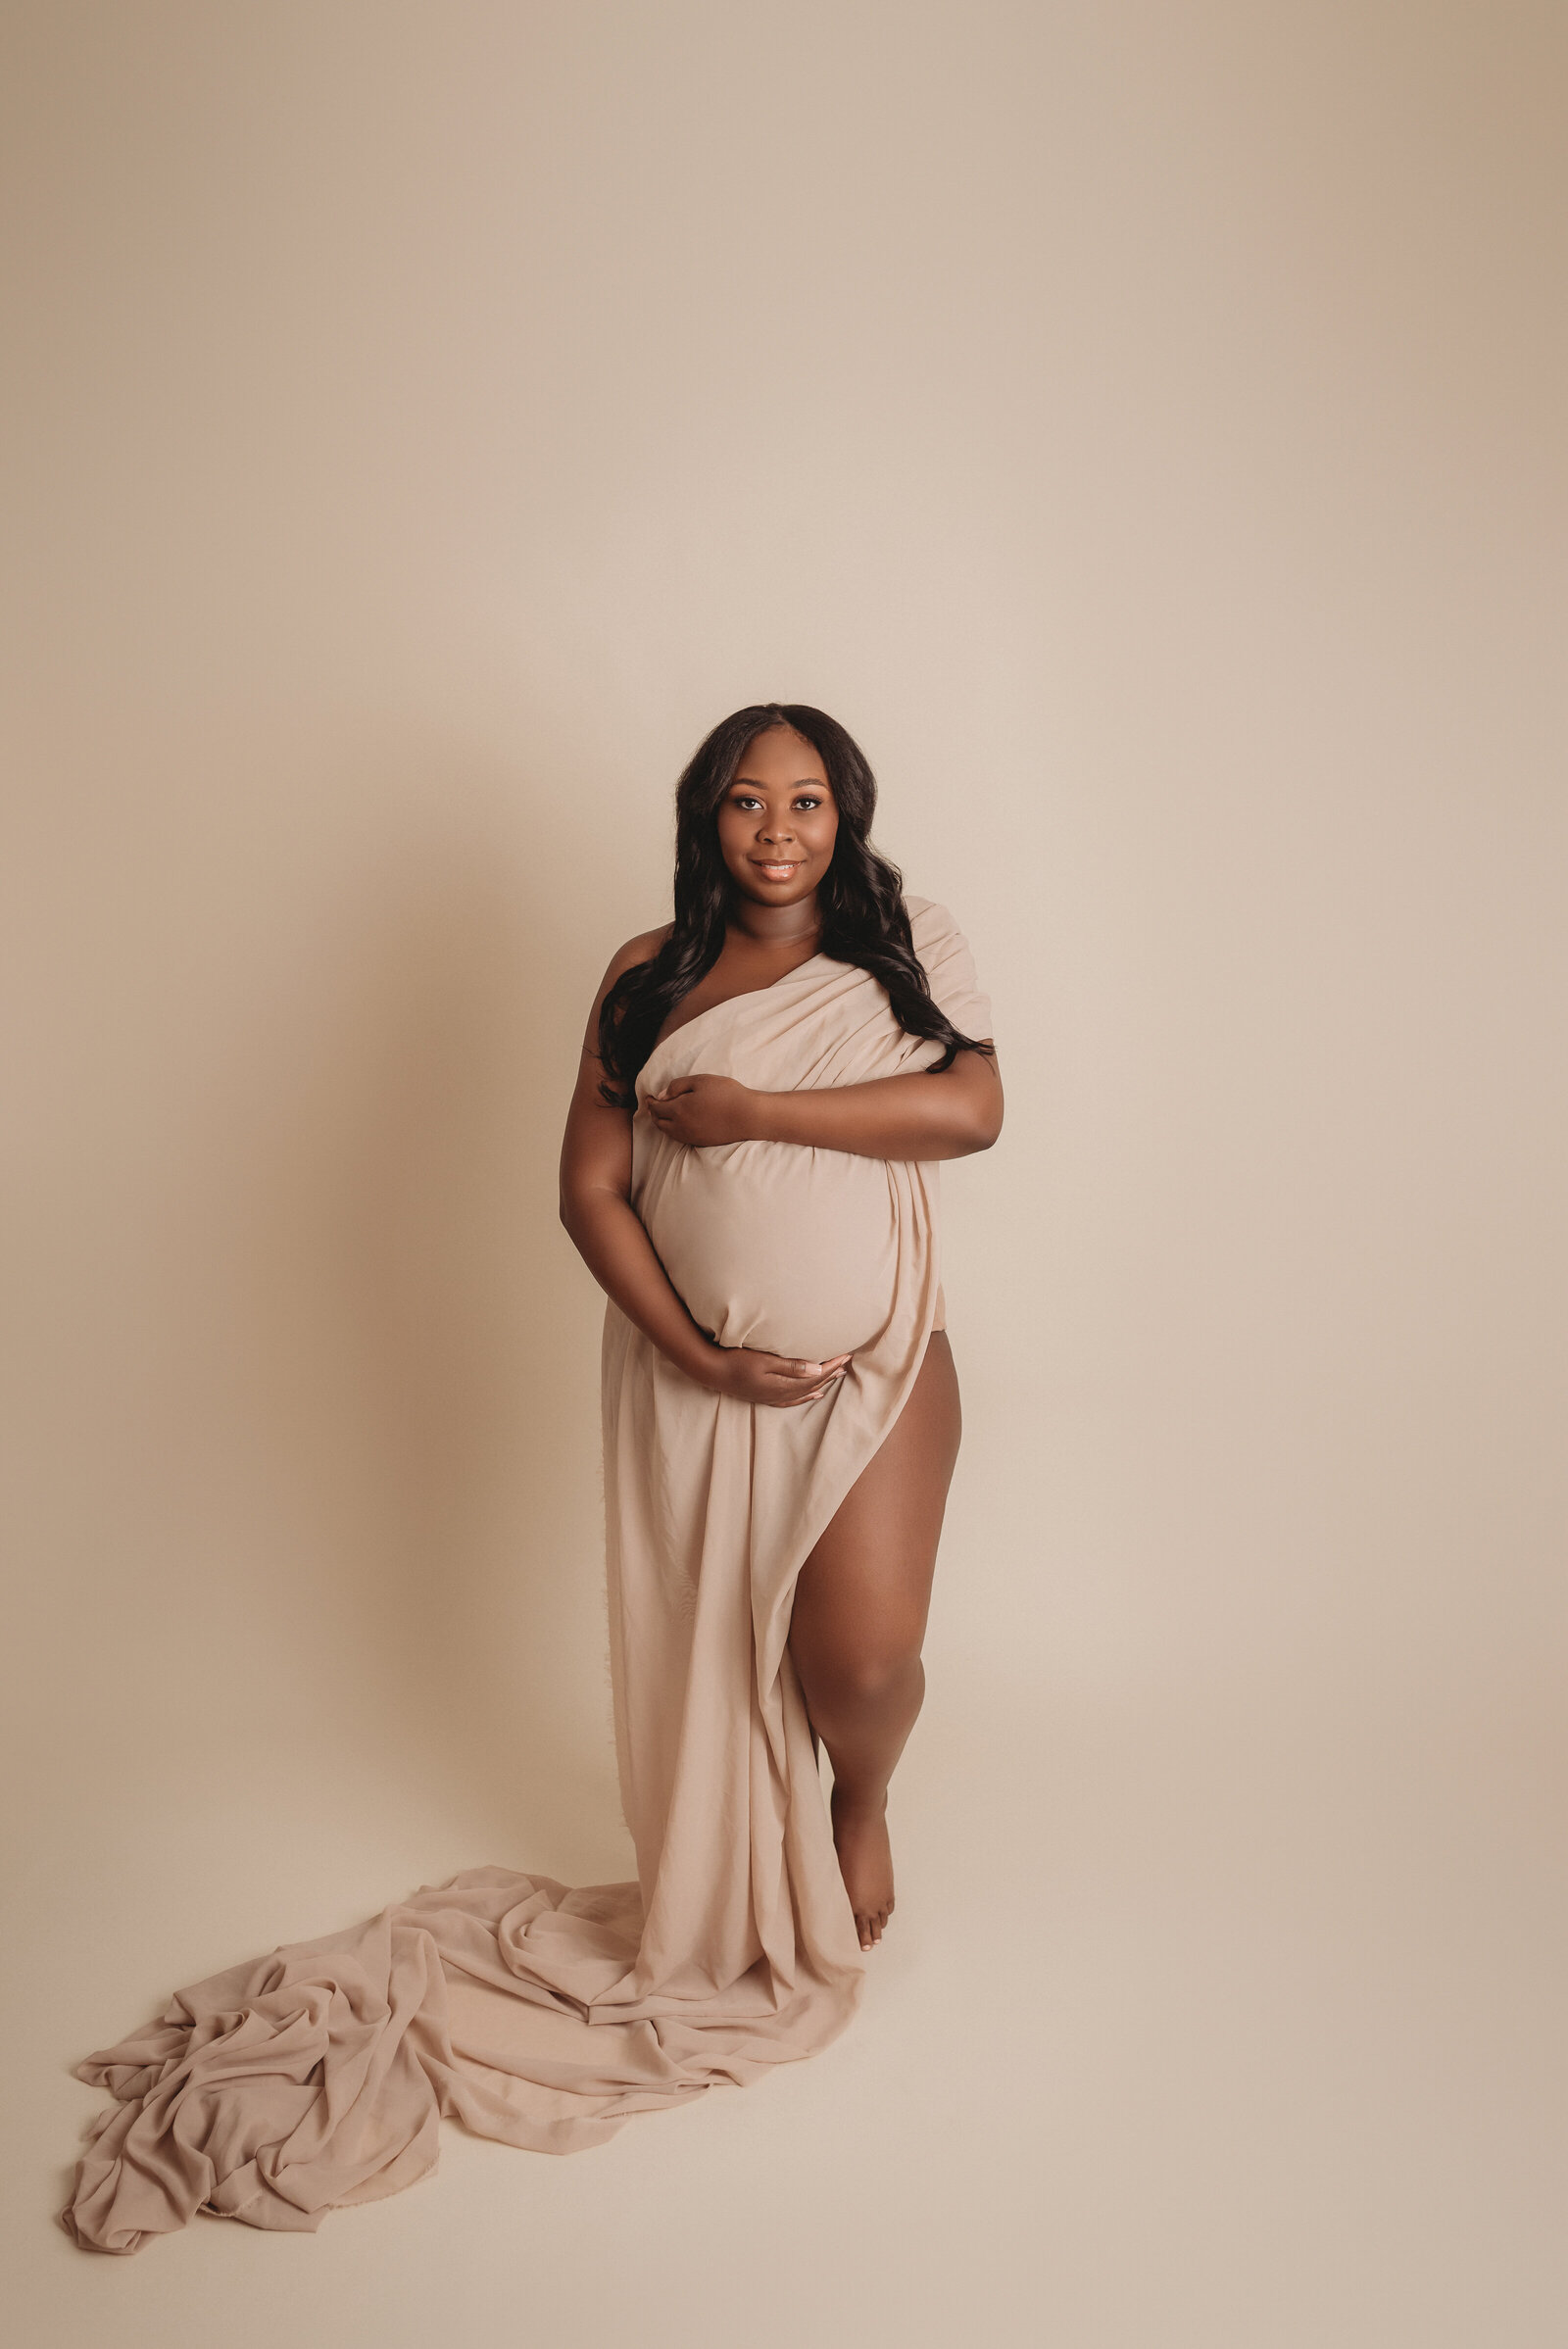 Pregnant woman photographed by atlanta maternity photographer Casey McMinn Photography standing on gray backdrop draped in cream chiffon fabric holding baby bump looking at camera